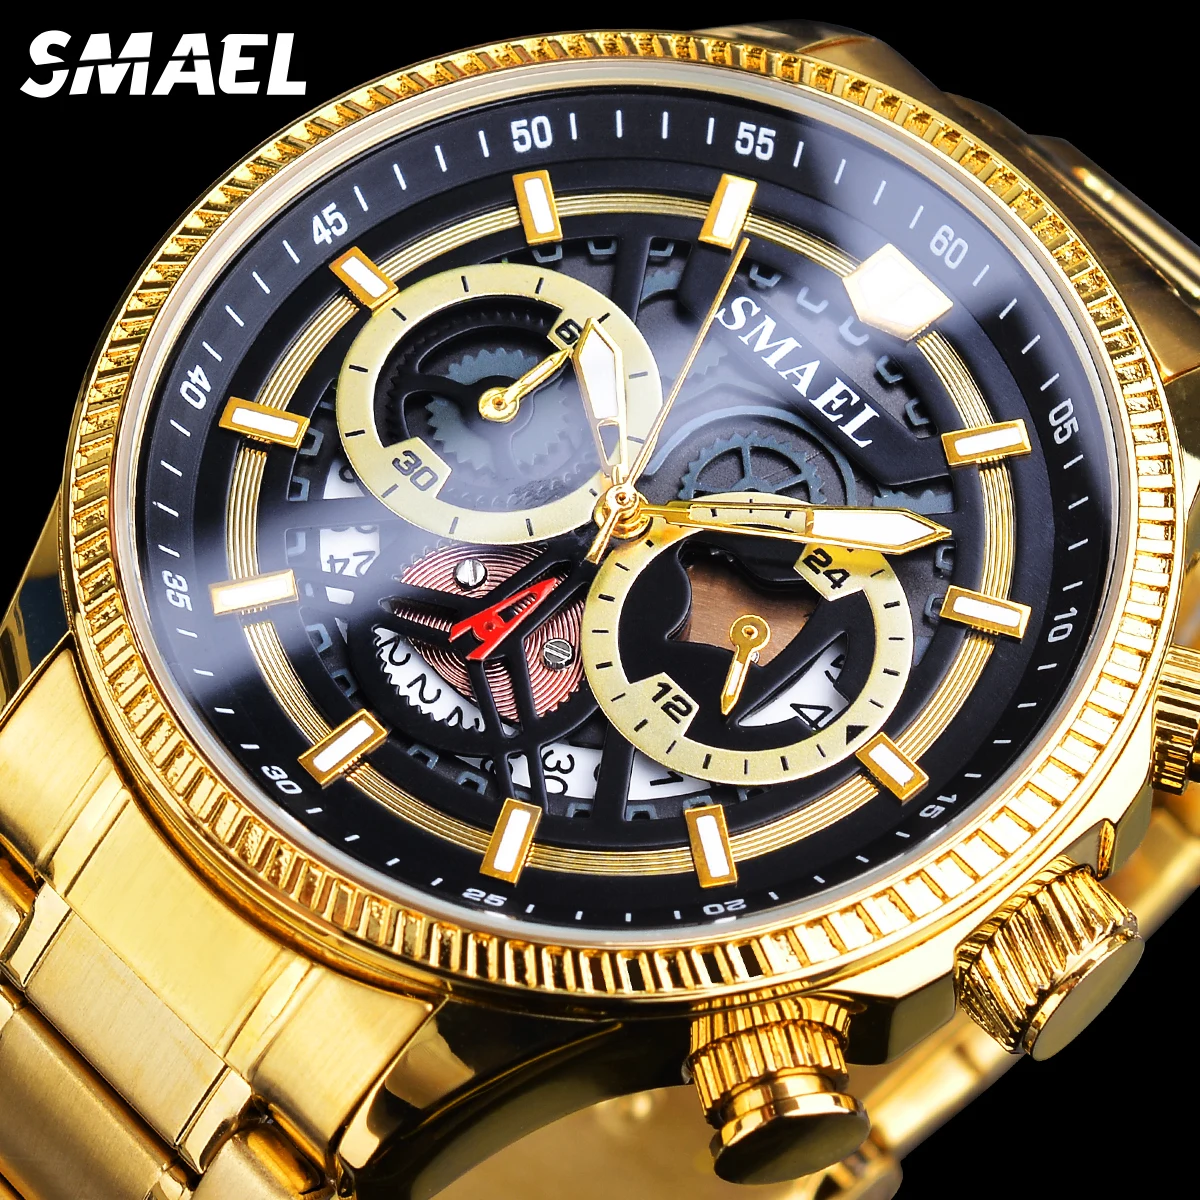 SMAEL Luxury Sports Quartz Watch Calender Military Wristwatch Black Dial Man Clock With Stainless Steel New Relogio Masculino